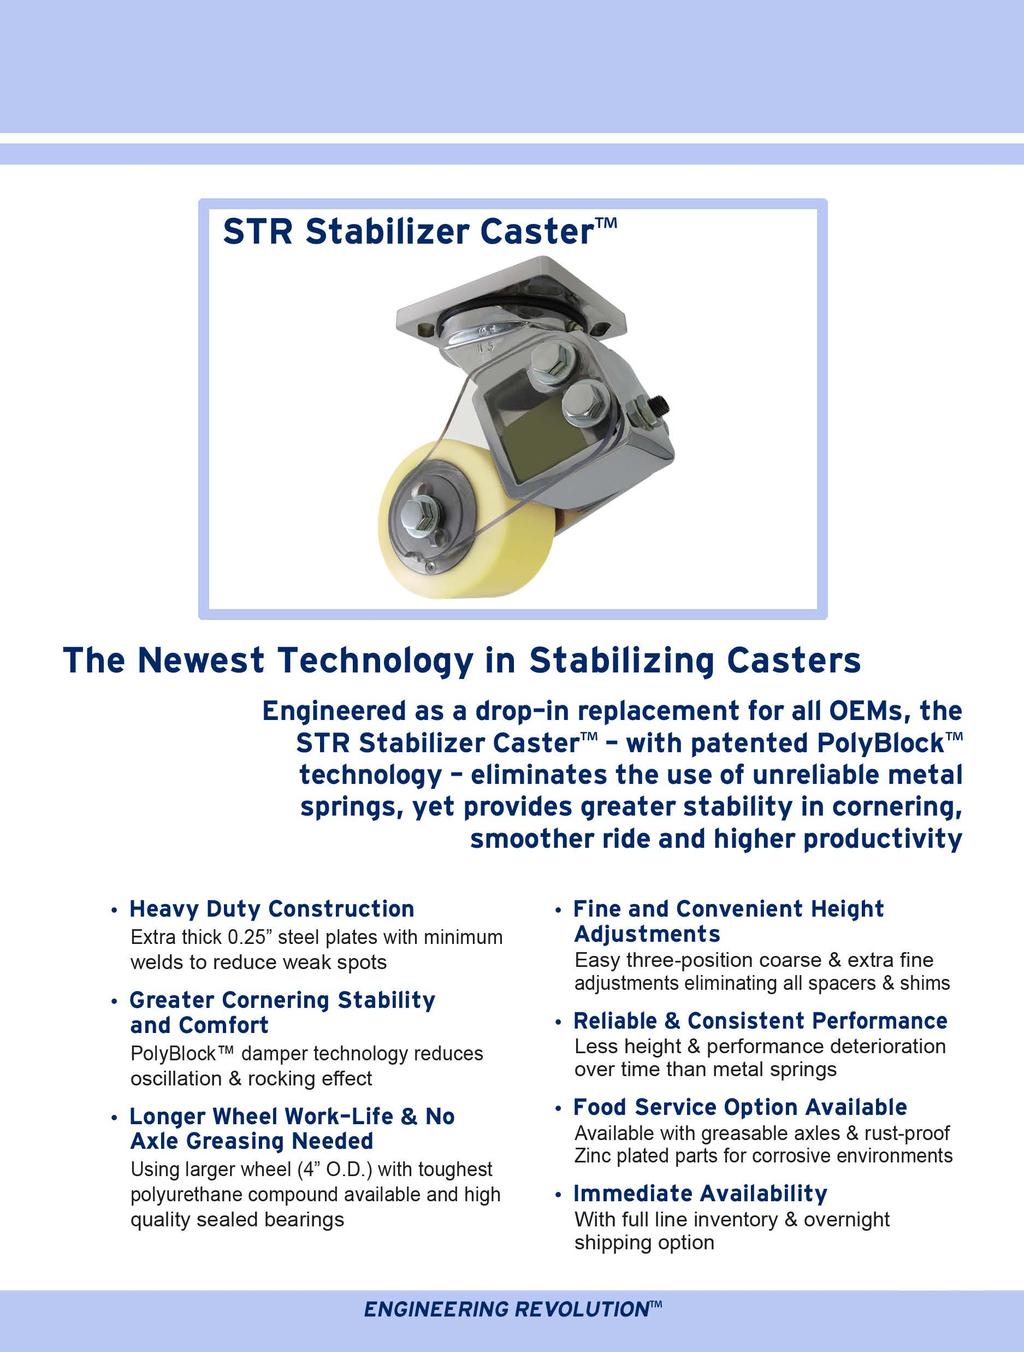 STR Stabilizer Caster The Newest Technology in Stabilizing Casters Engineered as a drop-in replacement for all OEMs, the STR Stabilizer Caster - with patented PolyBiock technology- eliminates the use